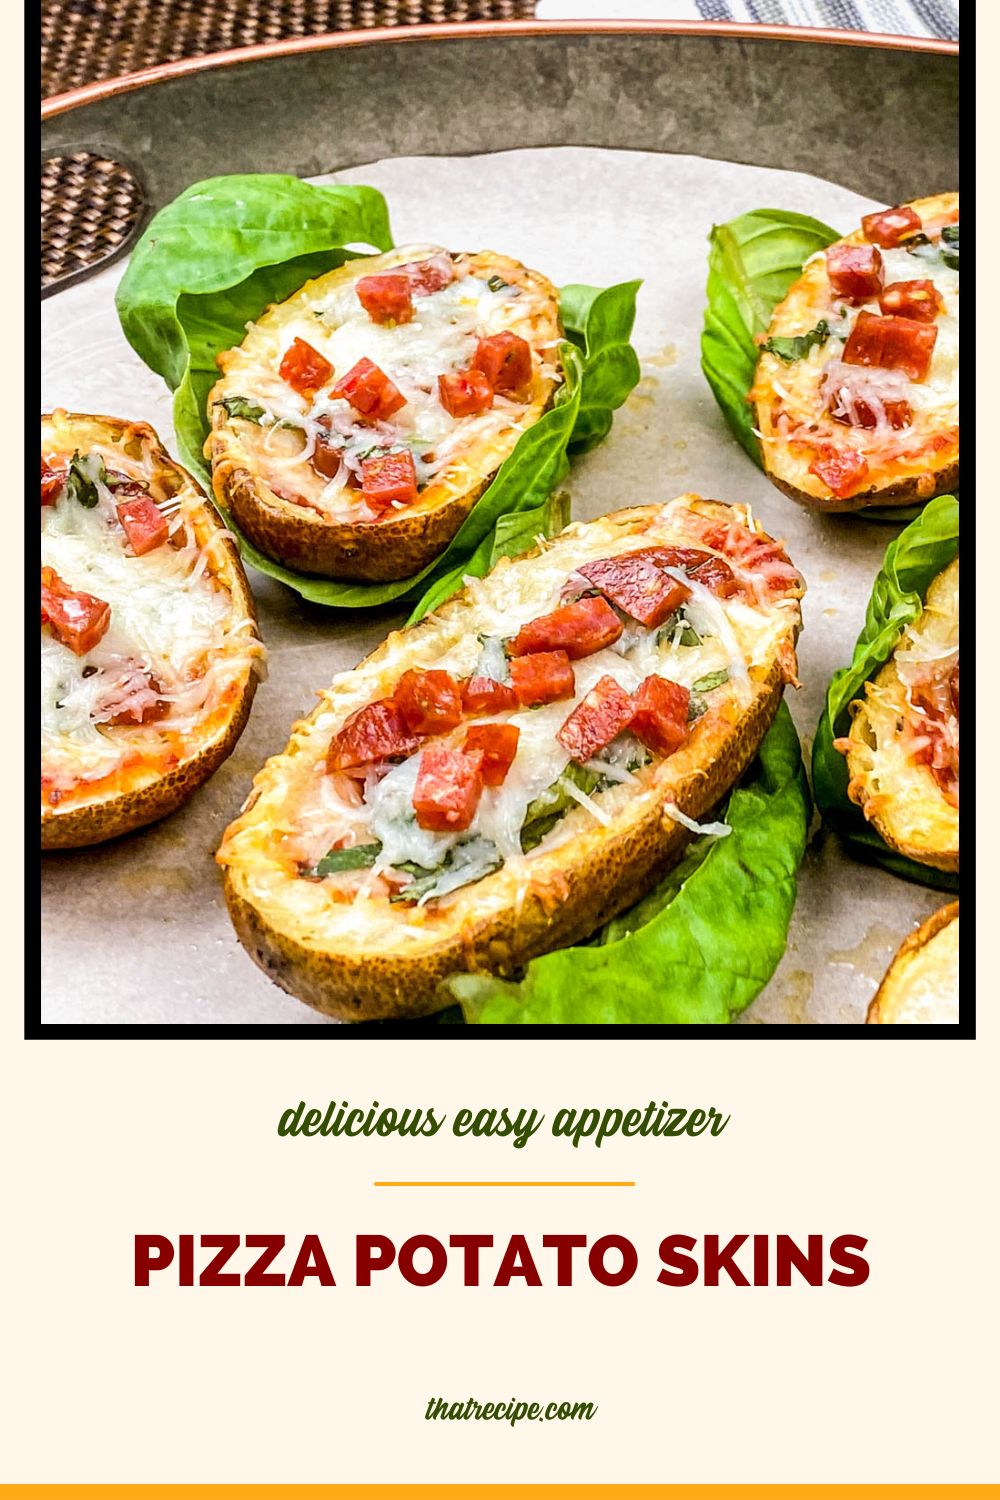 potato skins filled with pizza toppings